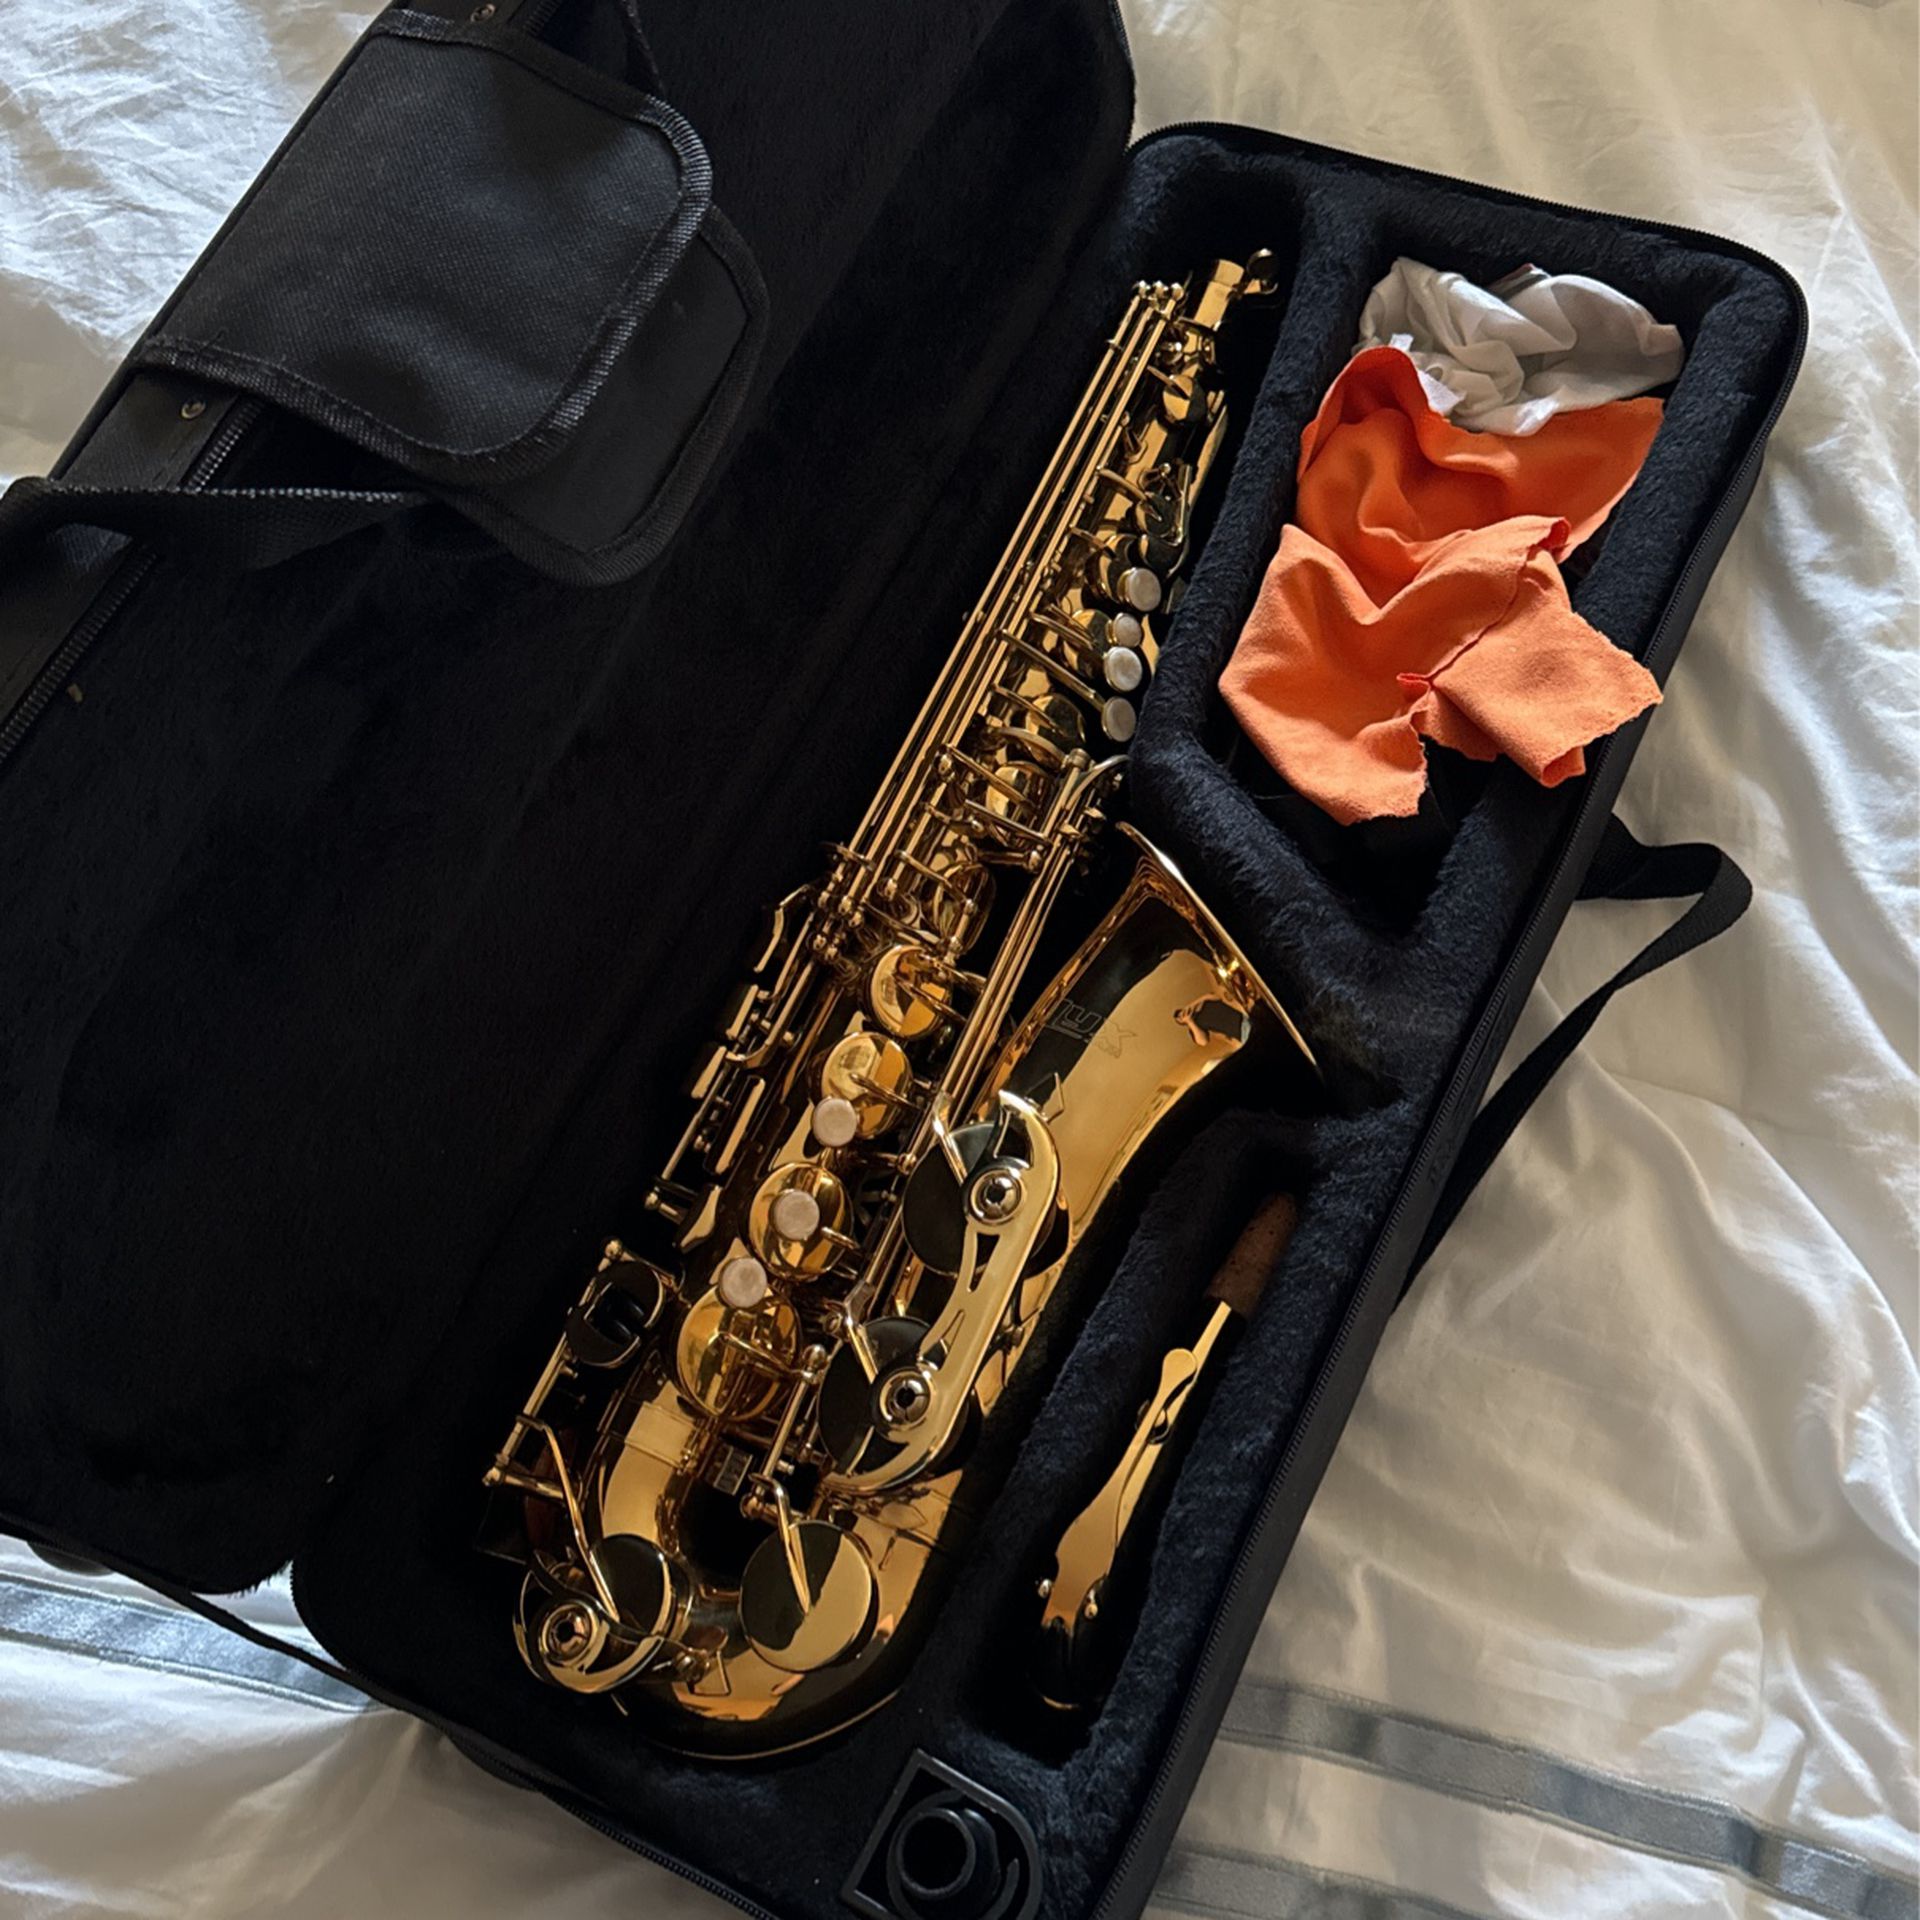 Saxophone For Sale!